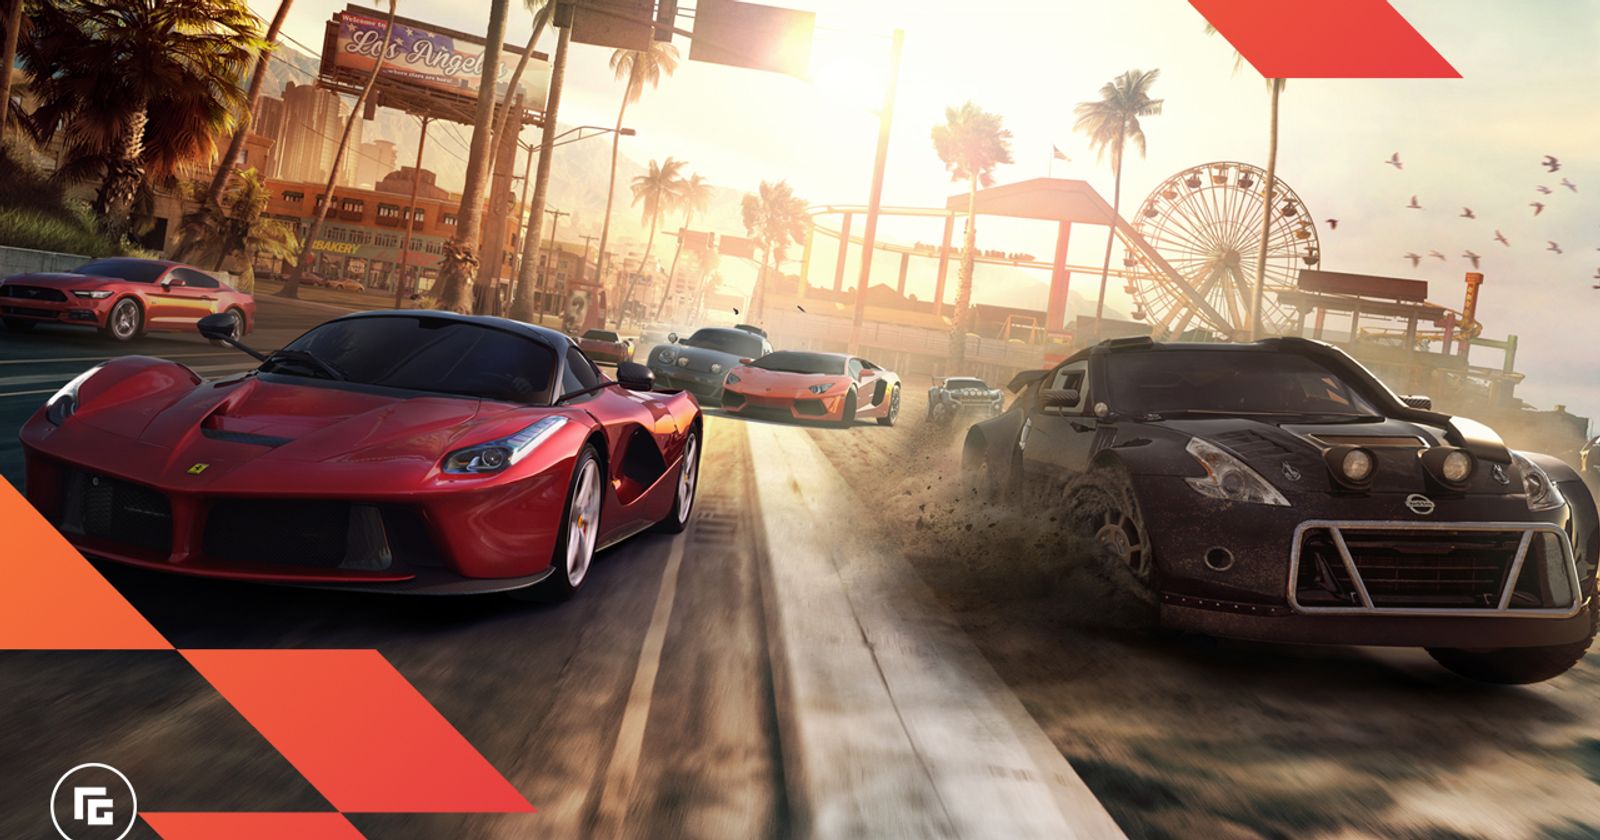 Ubisoft announces The Crew Motorfest, takes racers to Hawaii this